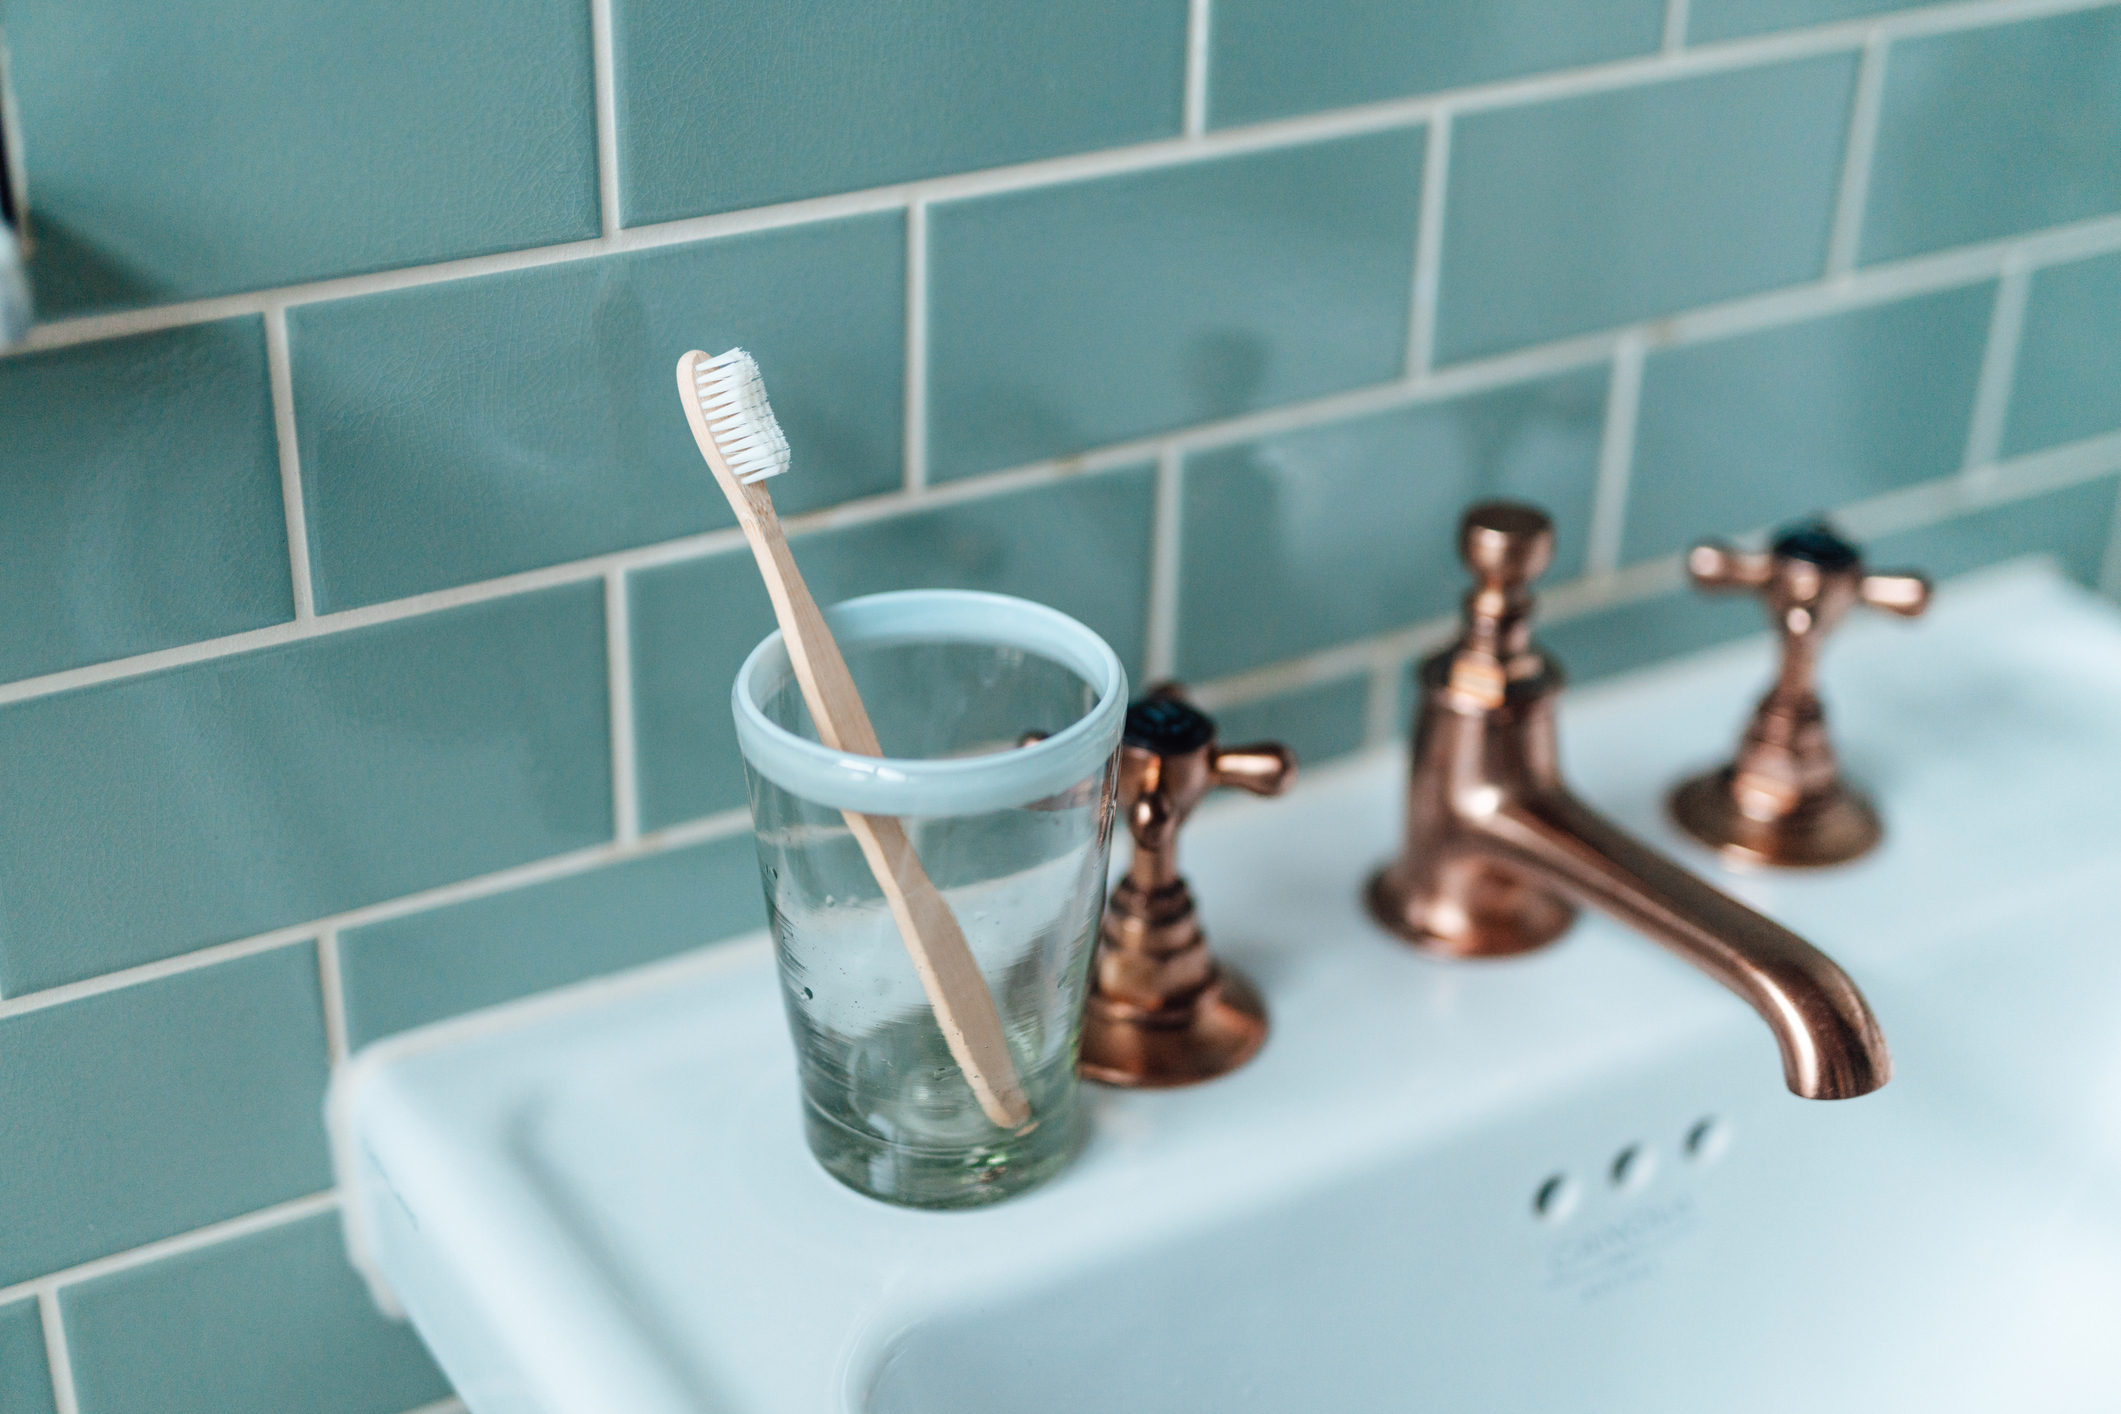 Bamboo toothbrush in a glass on a bathroom sink beside copper faucets